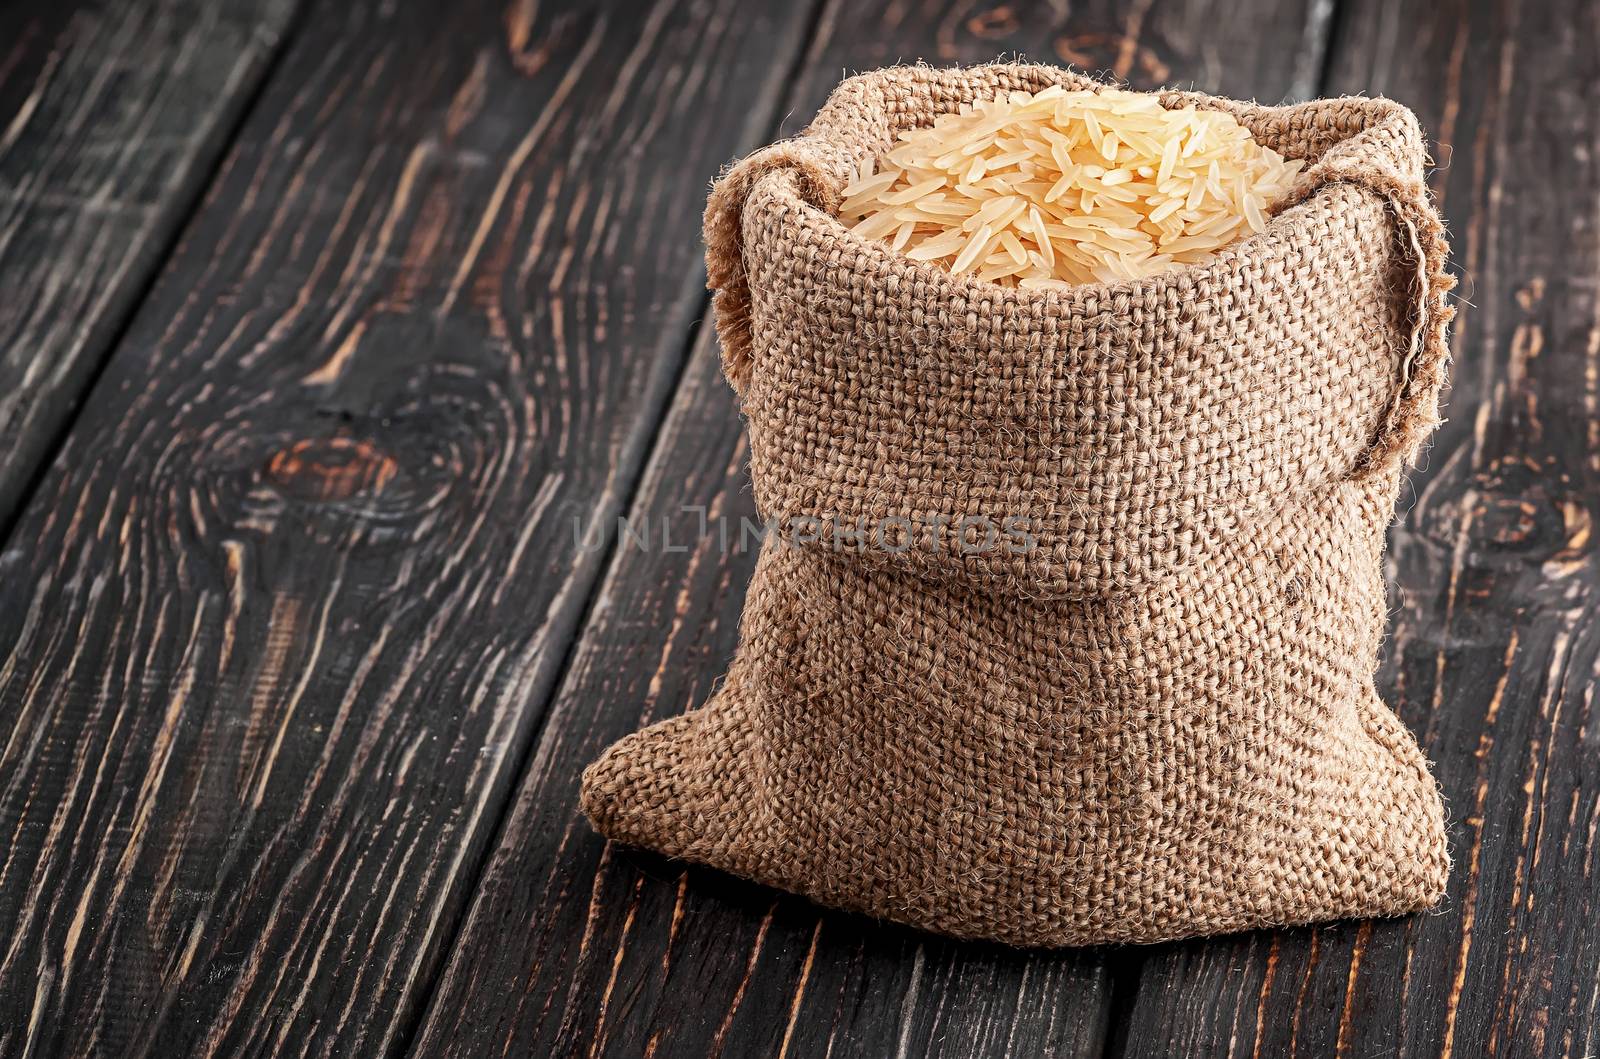 Sack of long rice stands on wooden background